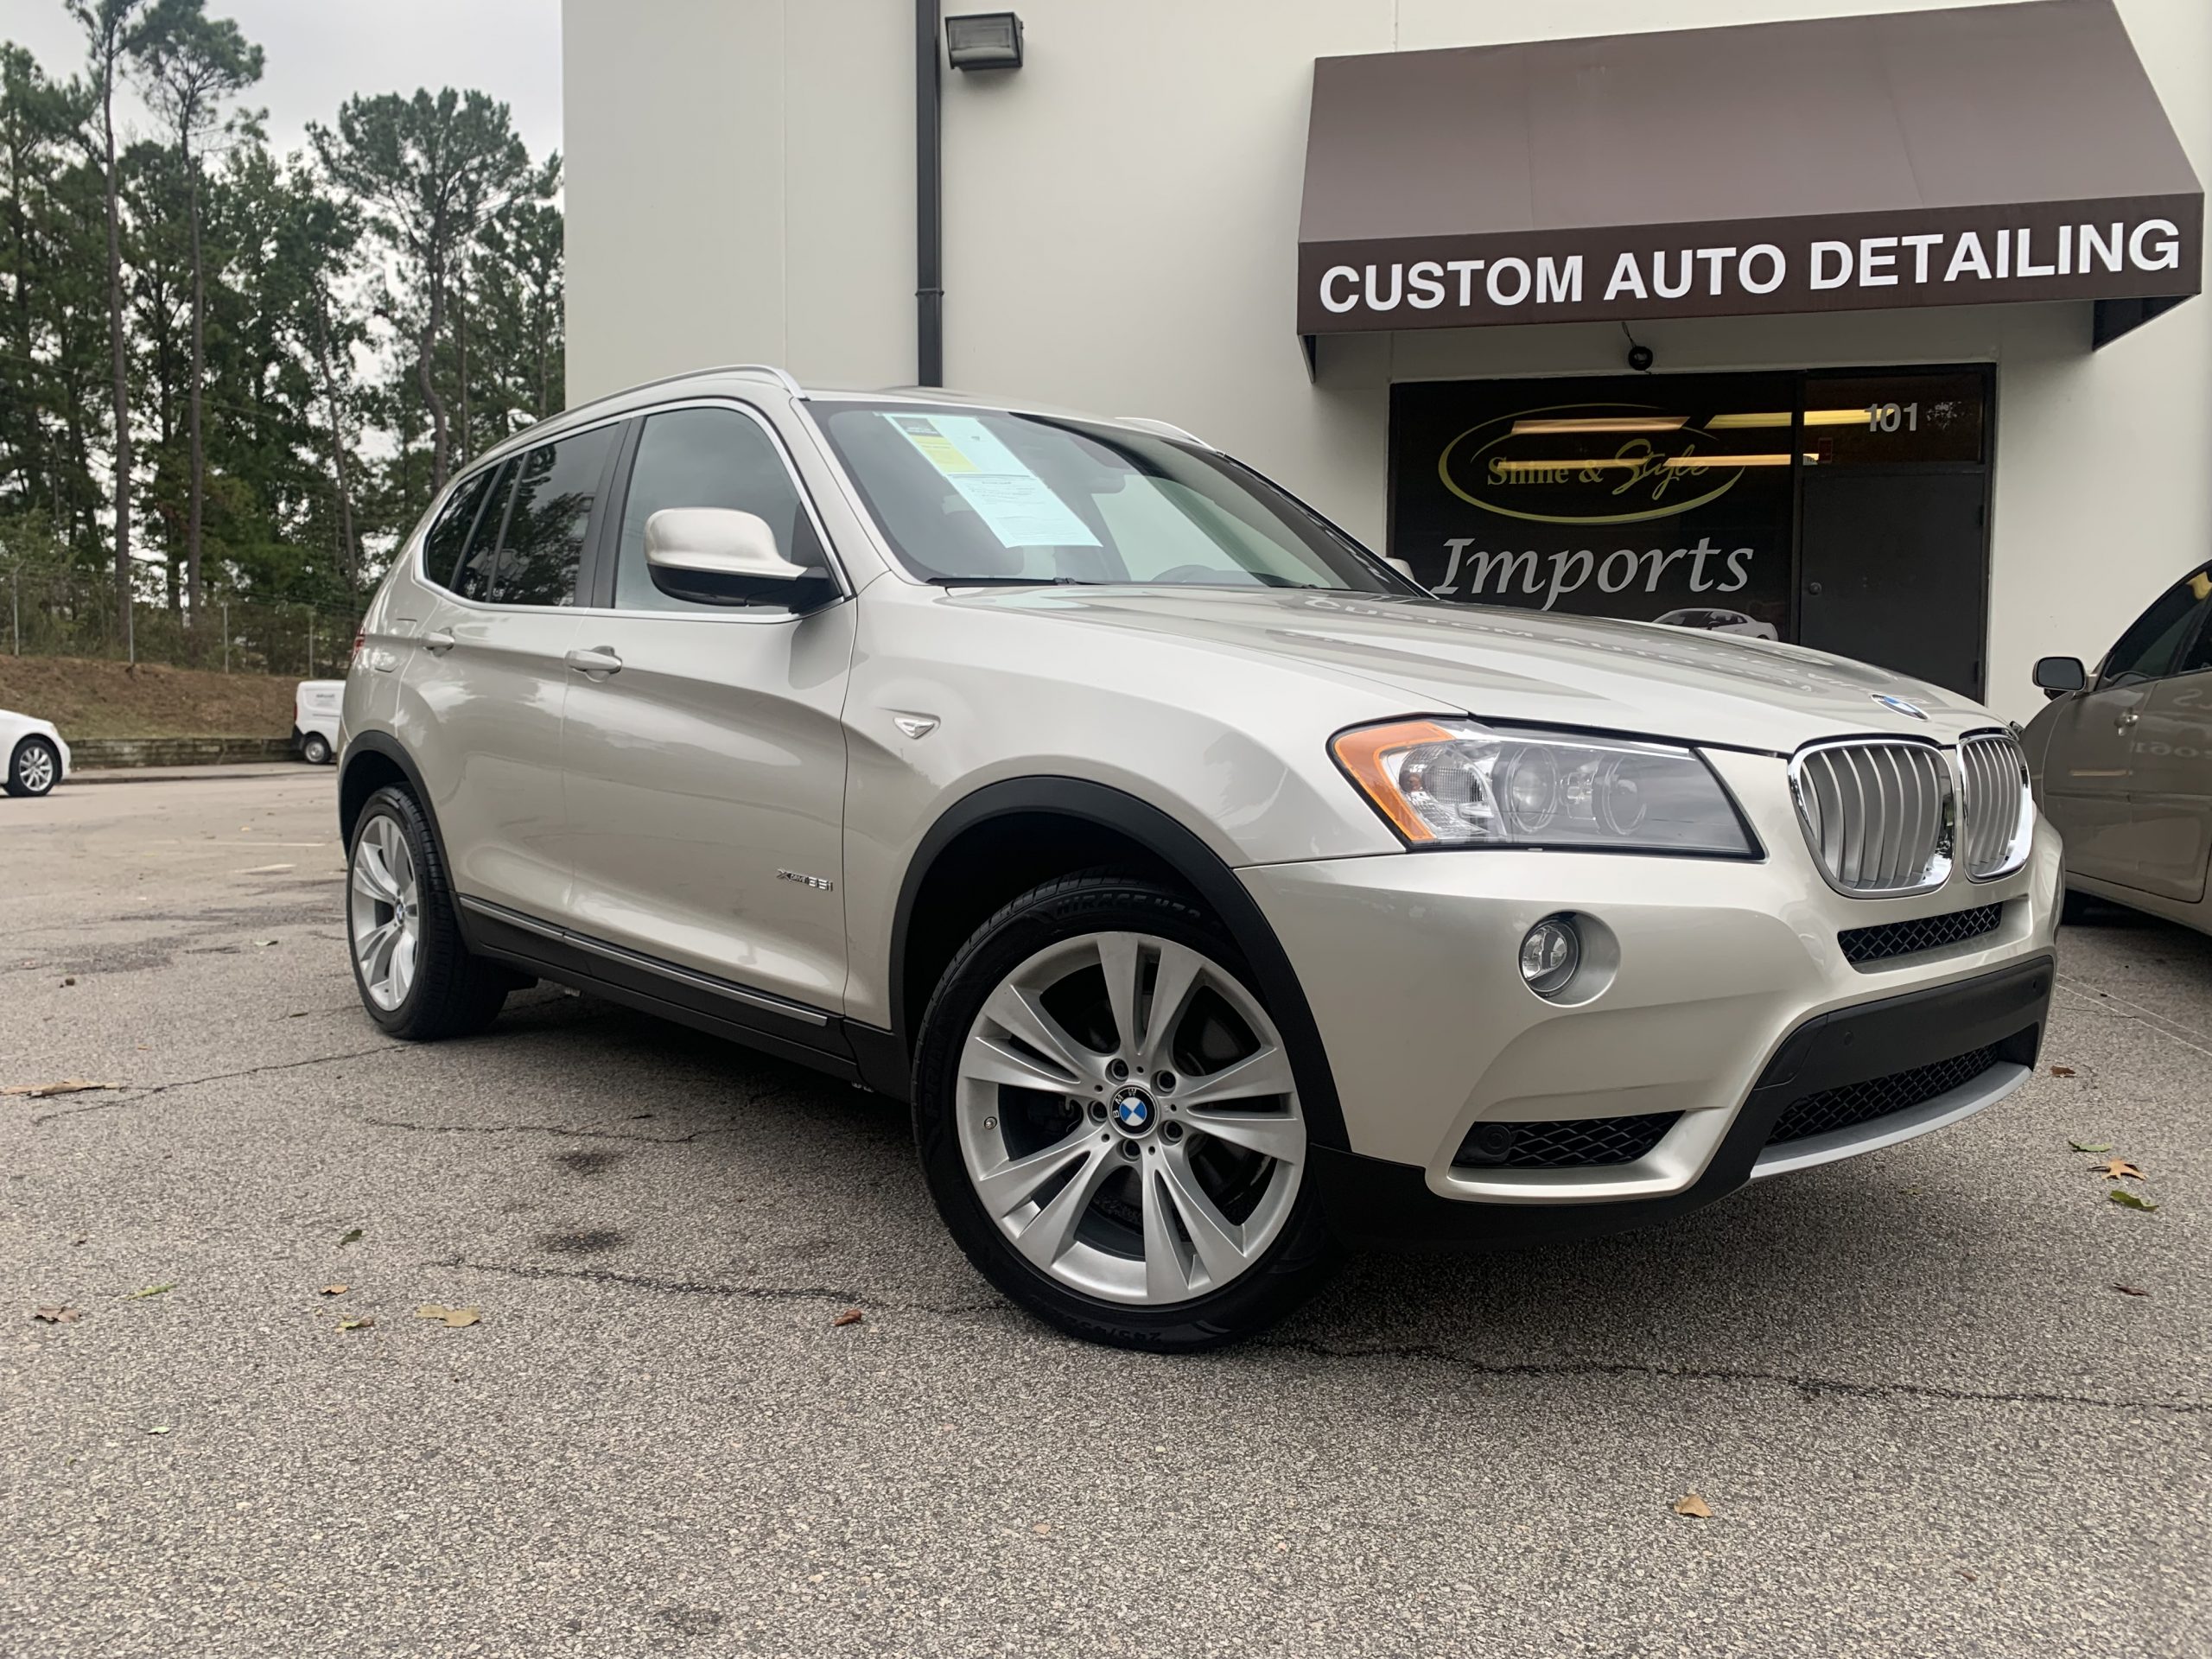 2012 BMW X3 XDrive 35i For Sale Raleigh